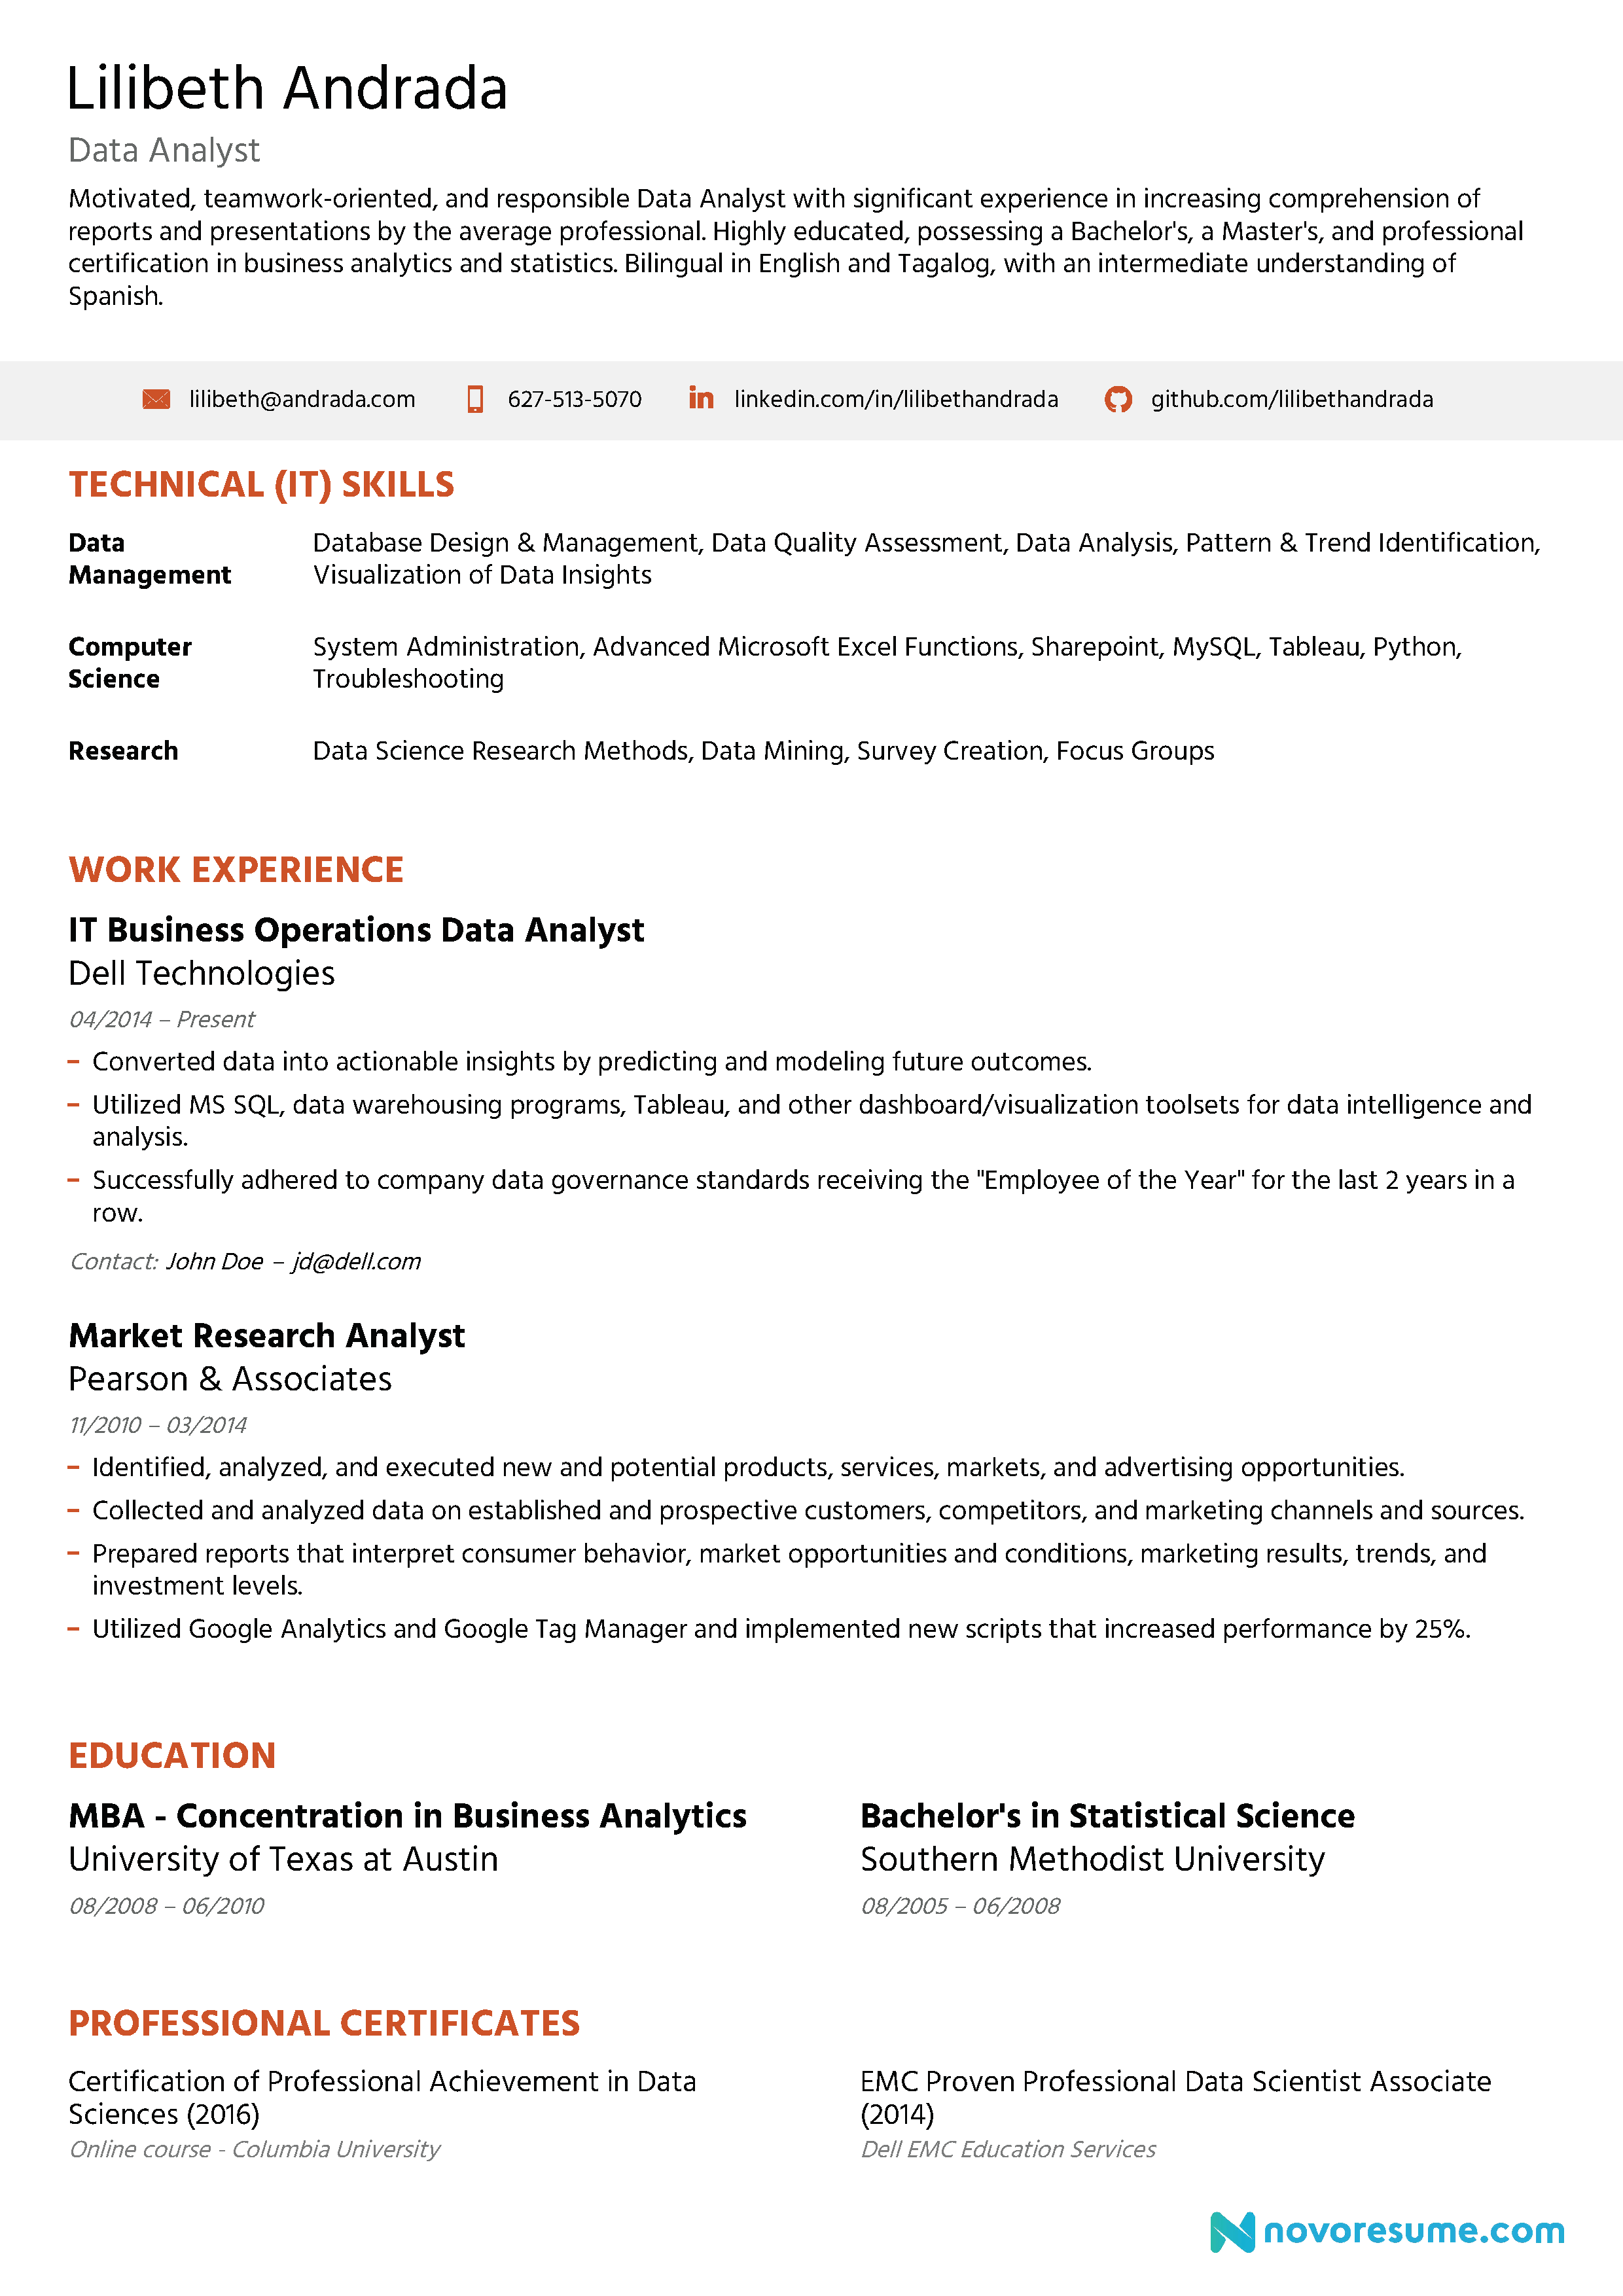 Professional Resume Examples Resume Example professional resume examples|wikiresume.com